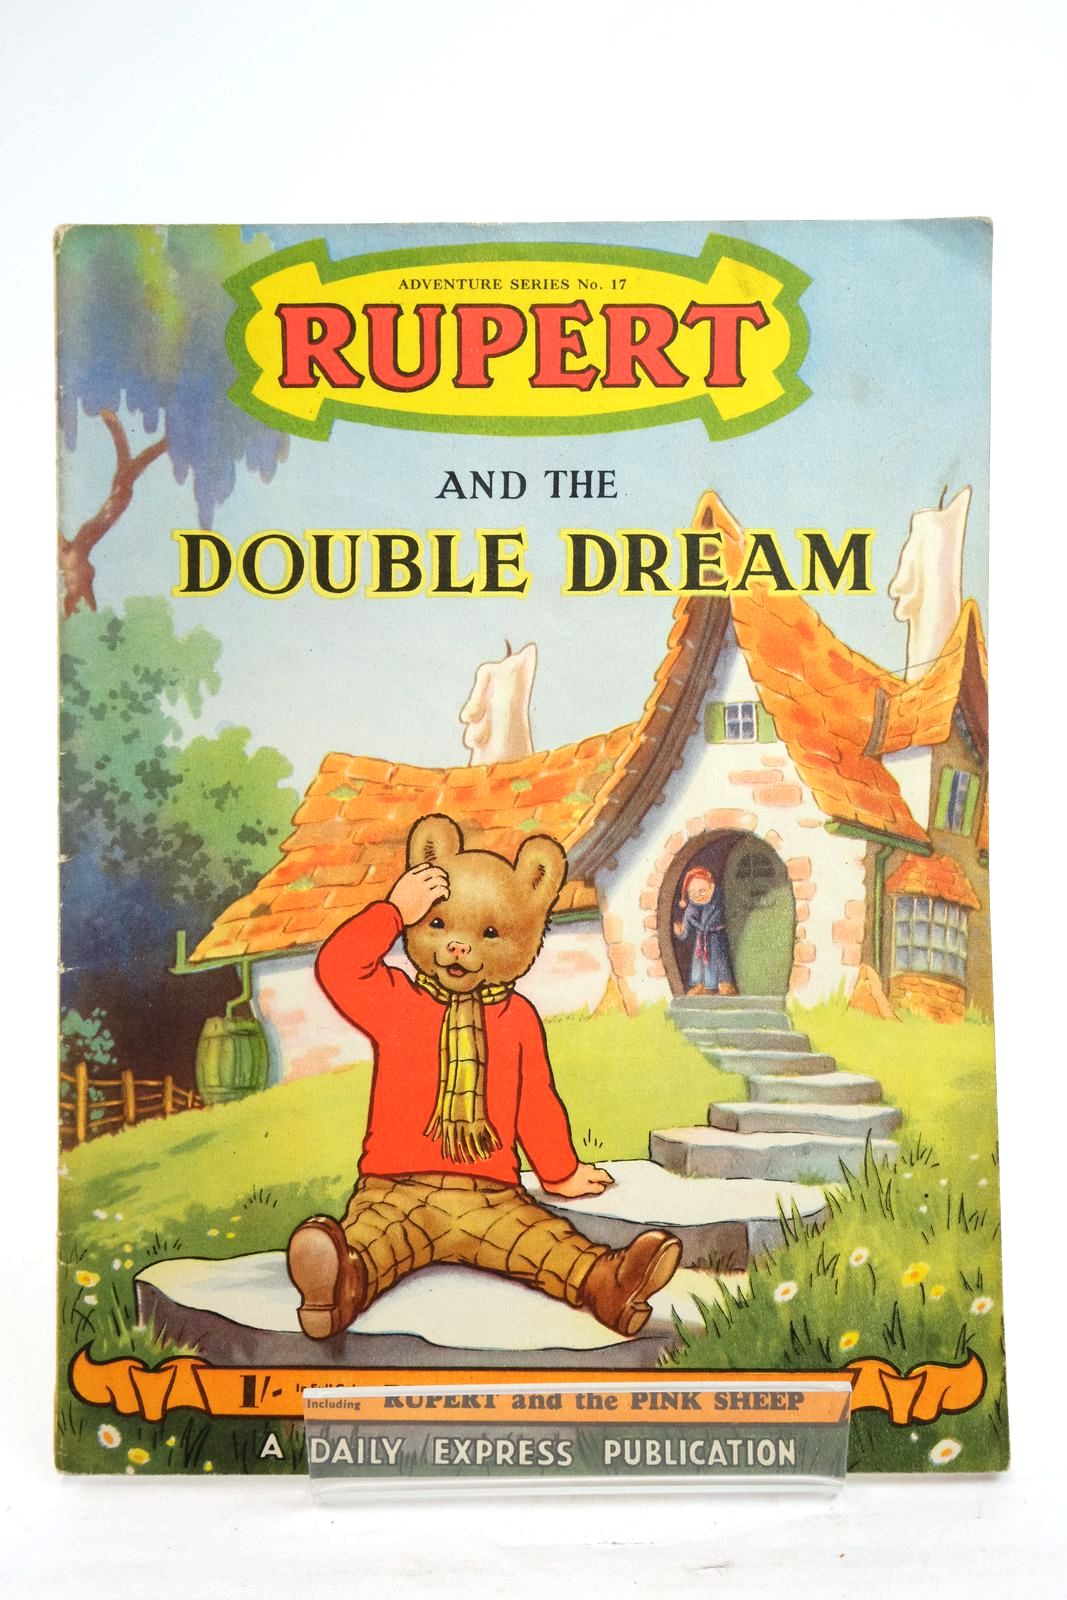 Photo of RUPERT ADVENTURE SERIES No. 17 - RUPERT AND THE DOUBLE DREAM written by Bestall, Alfred published by Daily Express (STOCK CODE: 2136974)  for sale by Stella & Rose's Books